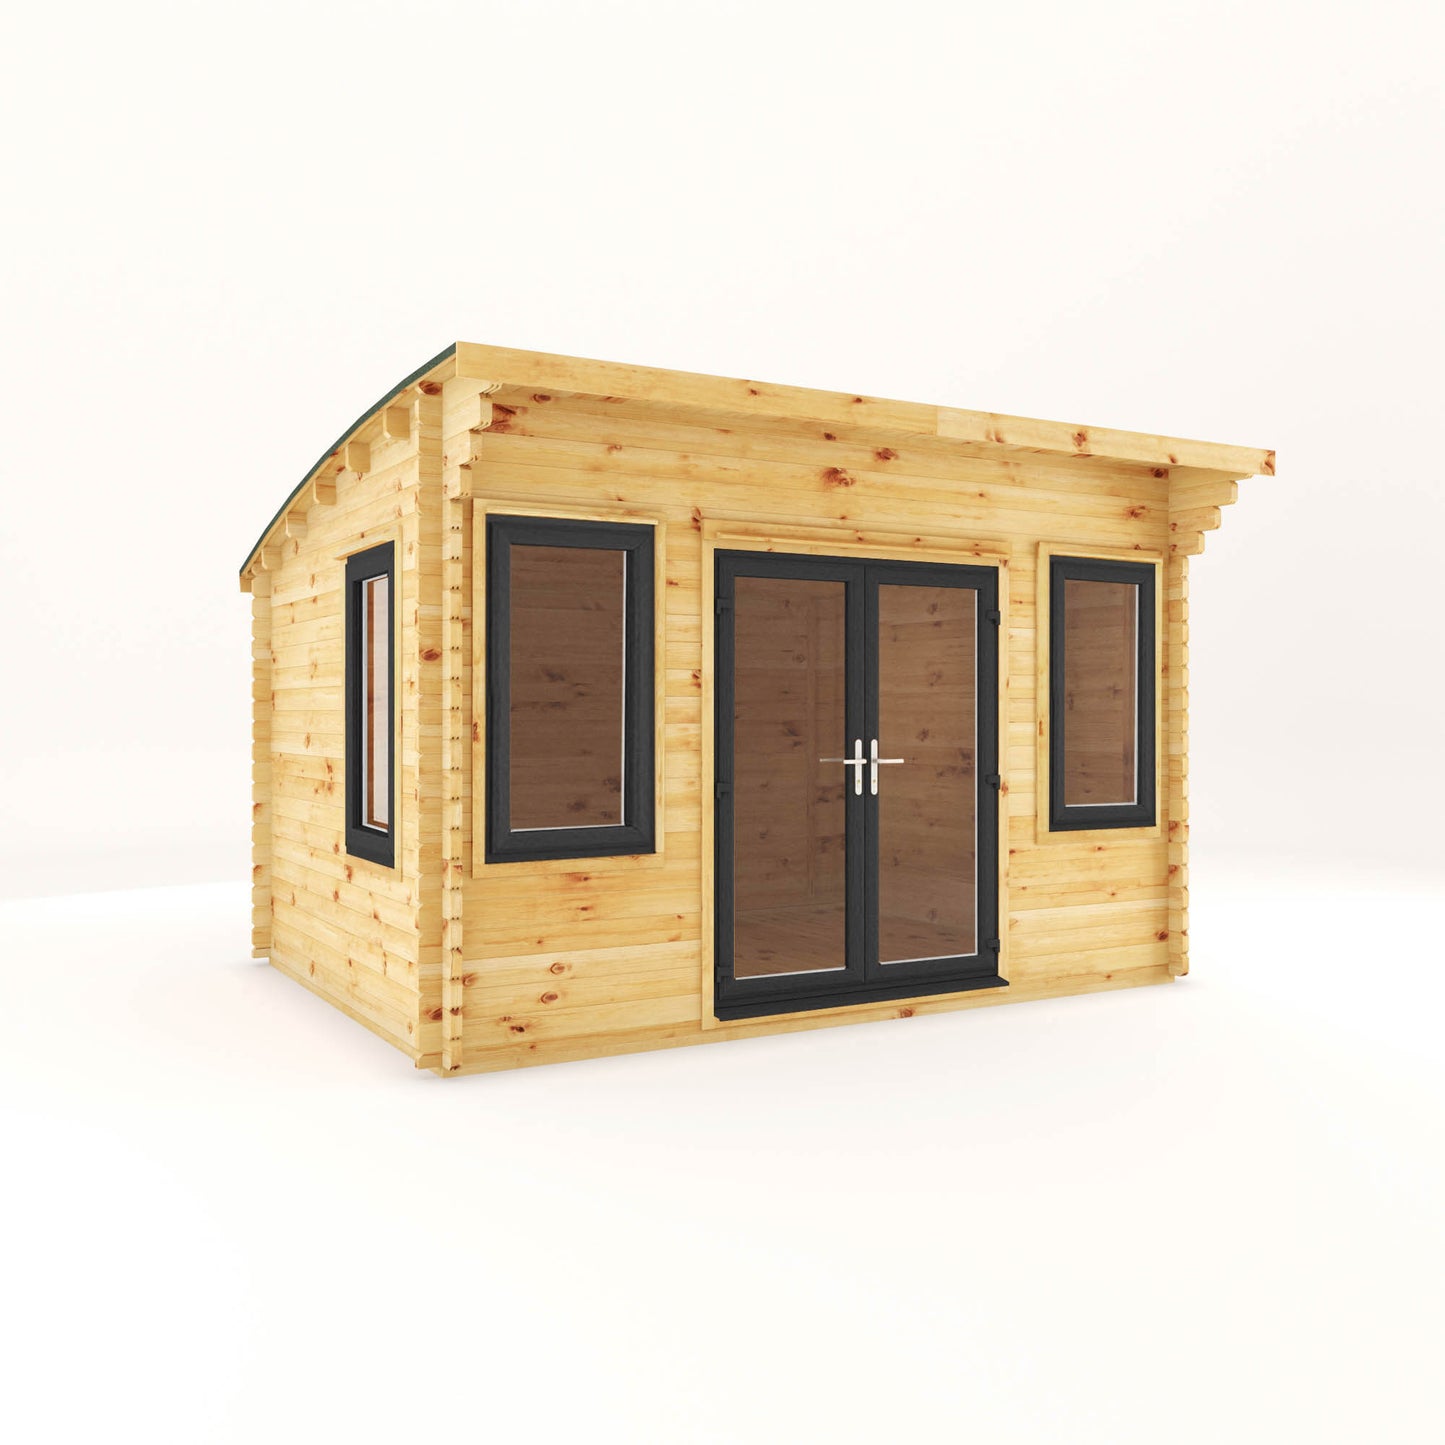 The 4m x 3m Tawny Curved Roof Log Cabin with Anthracite UPVC